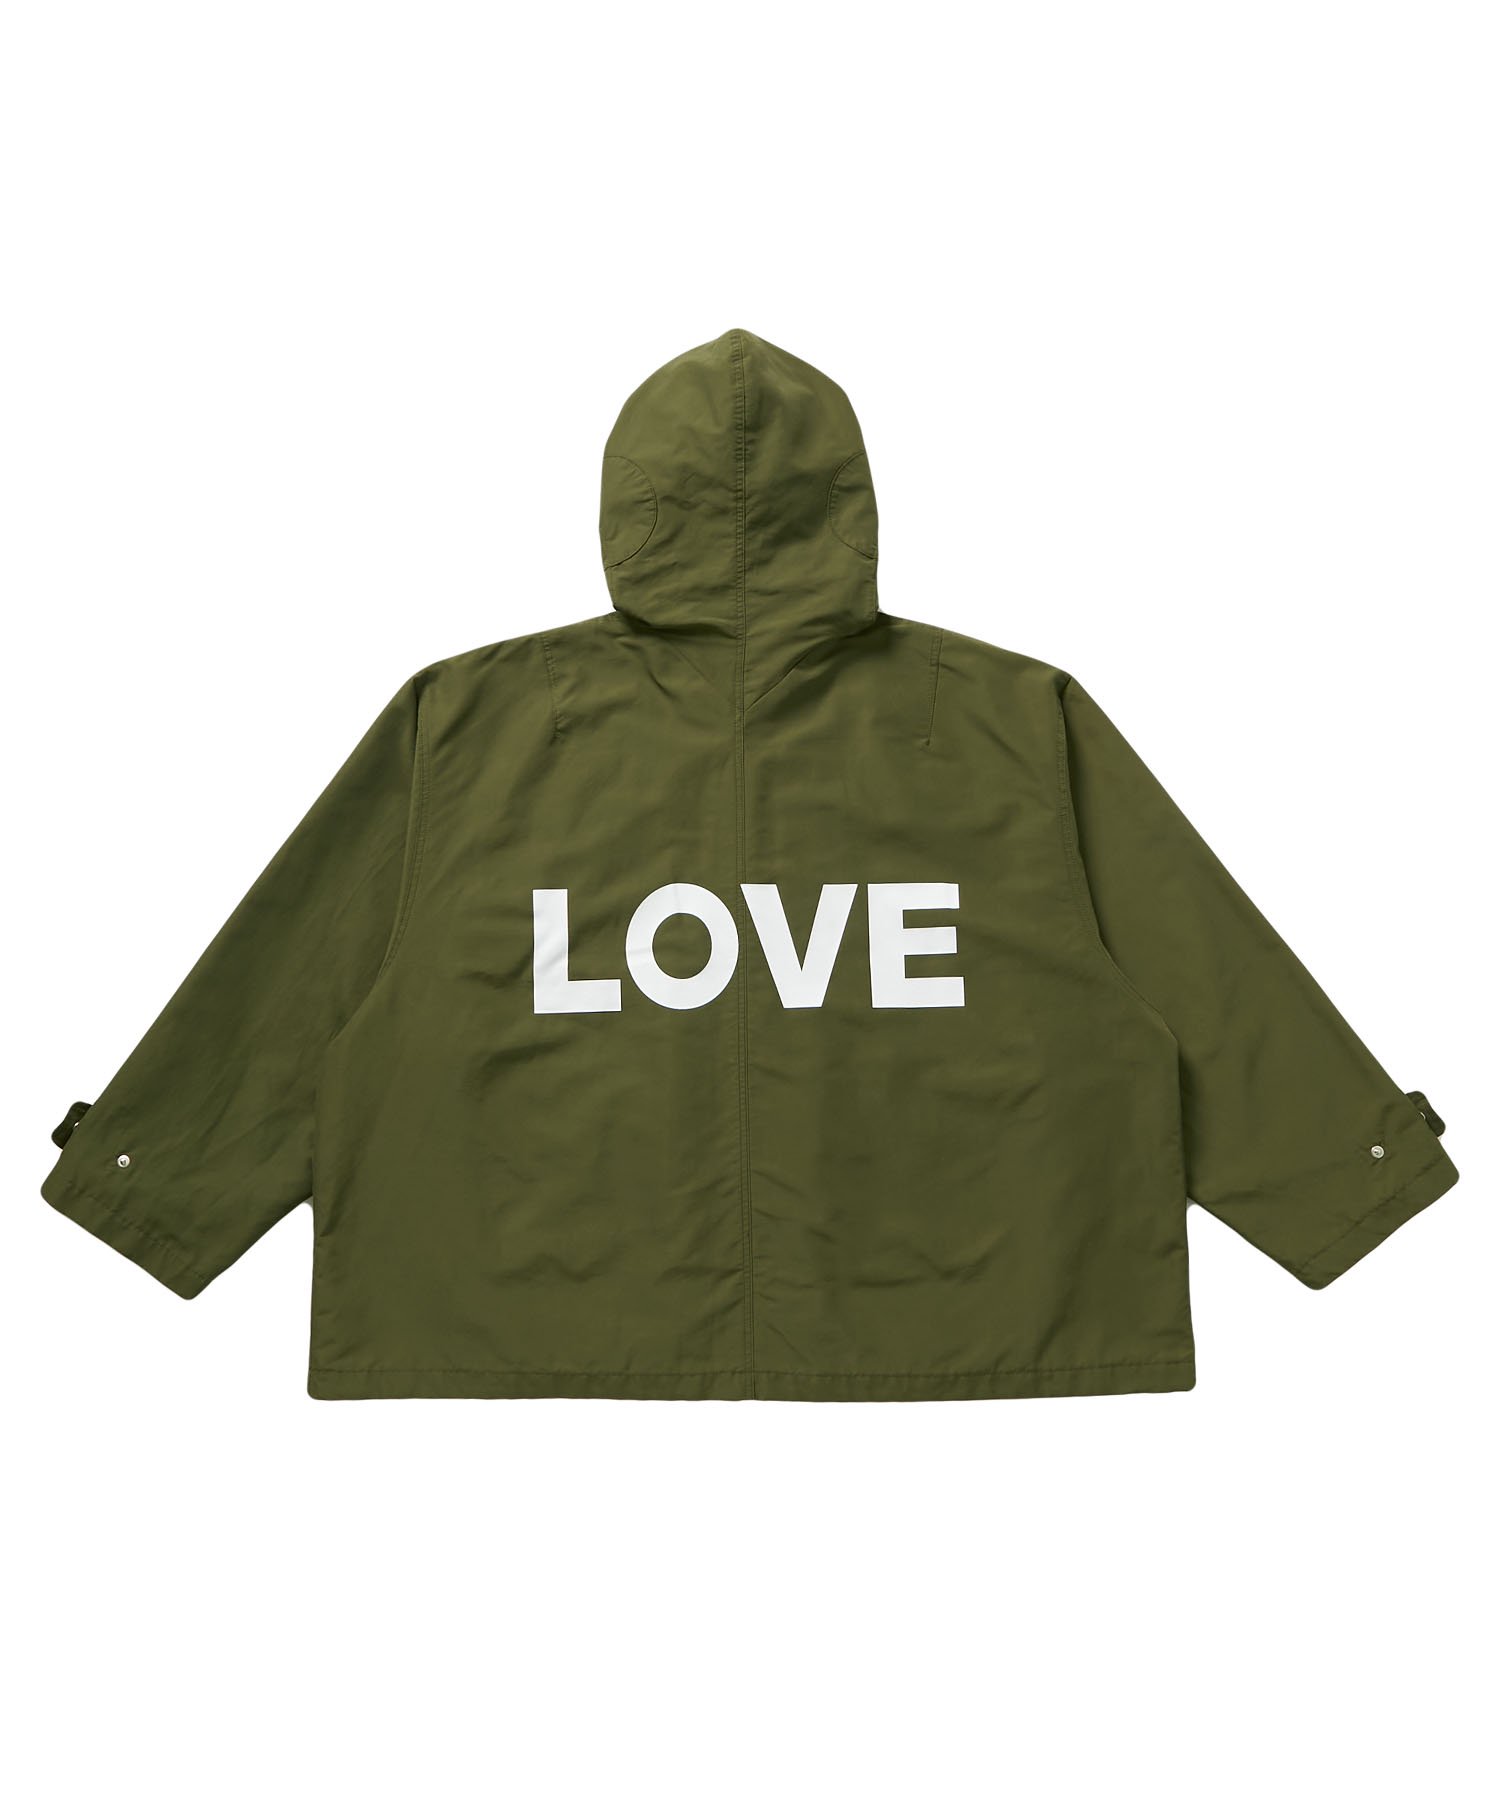 <img class='new_mark_img1' src='https://img.shop-pro.jp/img/new/icons15.gif' style='border:none;display:inline;margin:0px;padding:0px;width:auto;' />【KATHARINE HAMNETT】REBEL PARKA WITH LOVE（OLV）